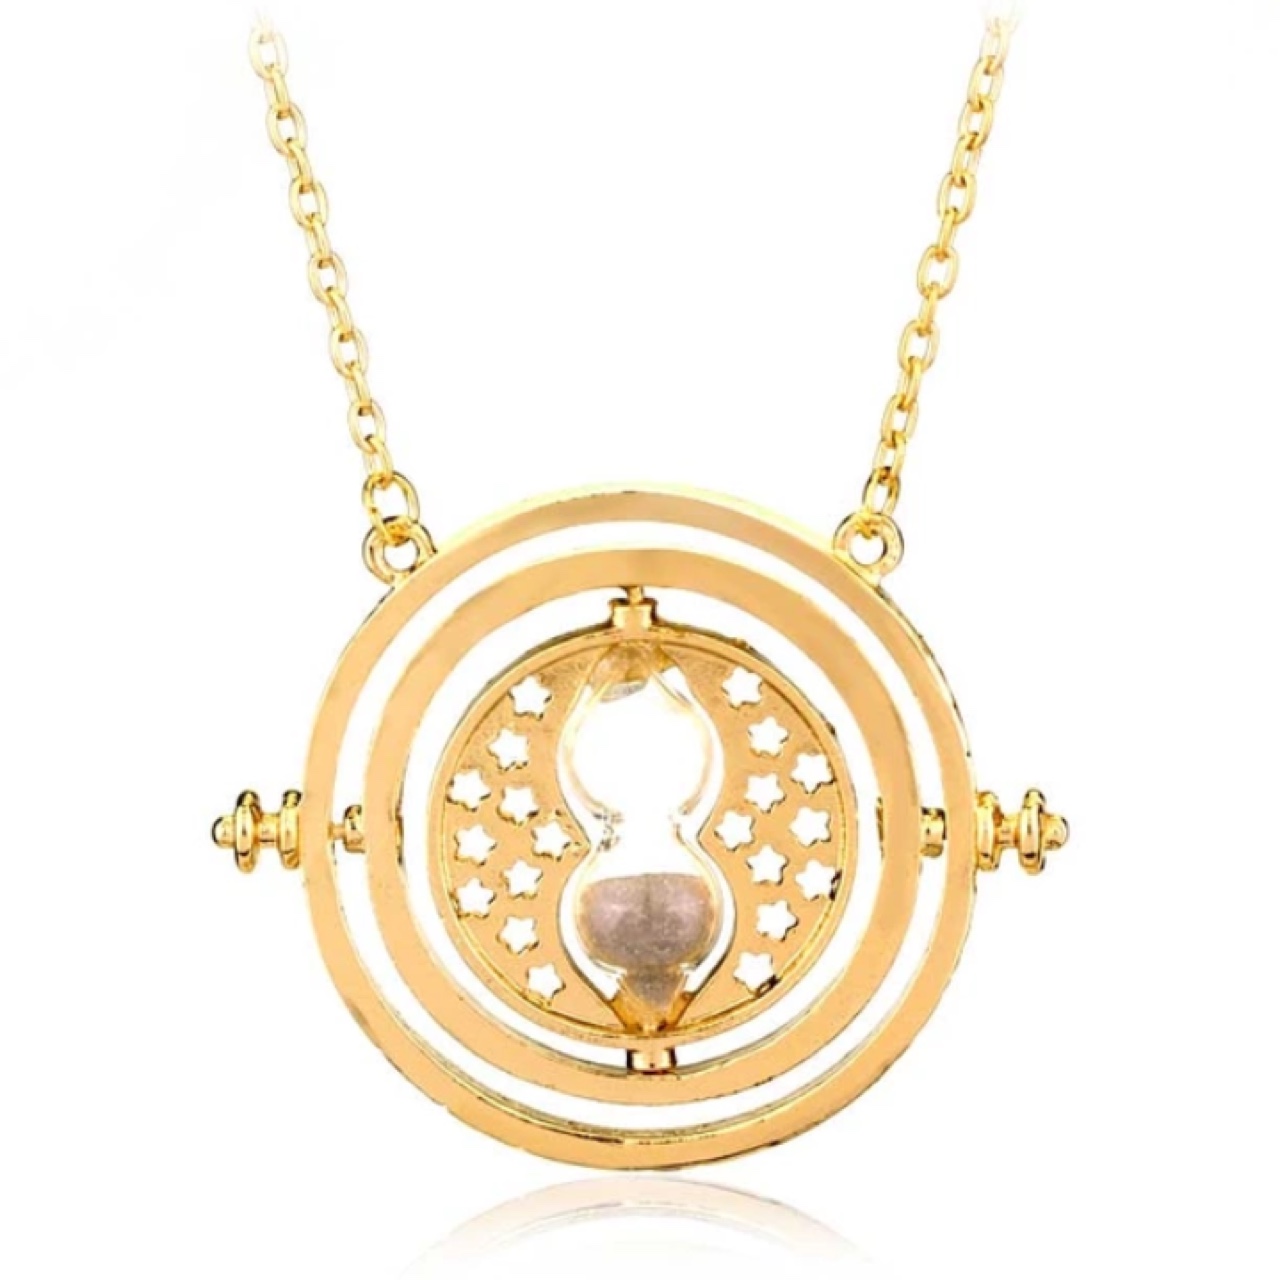 Hermione's Gold Tone Harry Potter Time Turner Rotating Hourglass Necklace 1.1